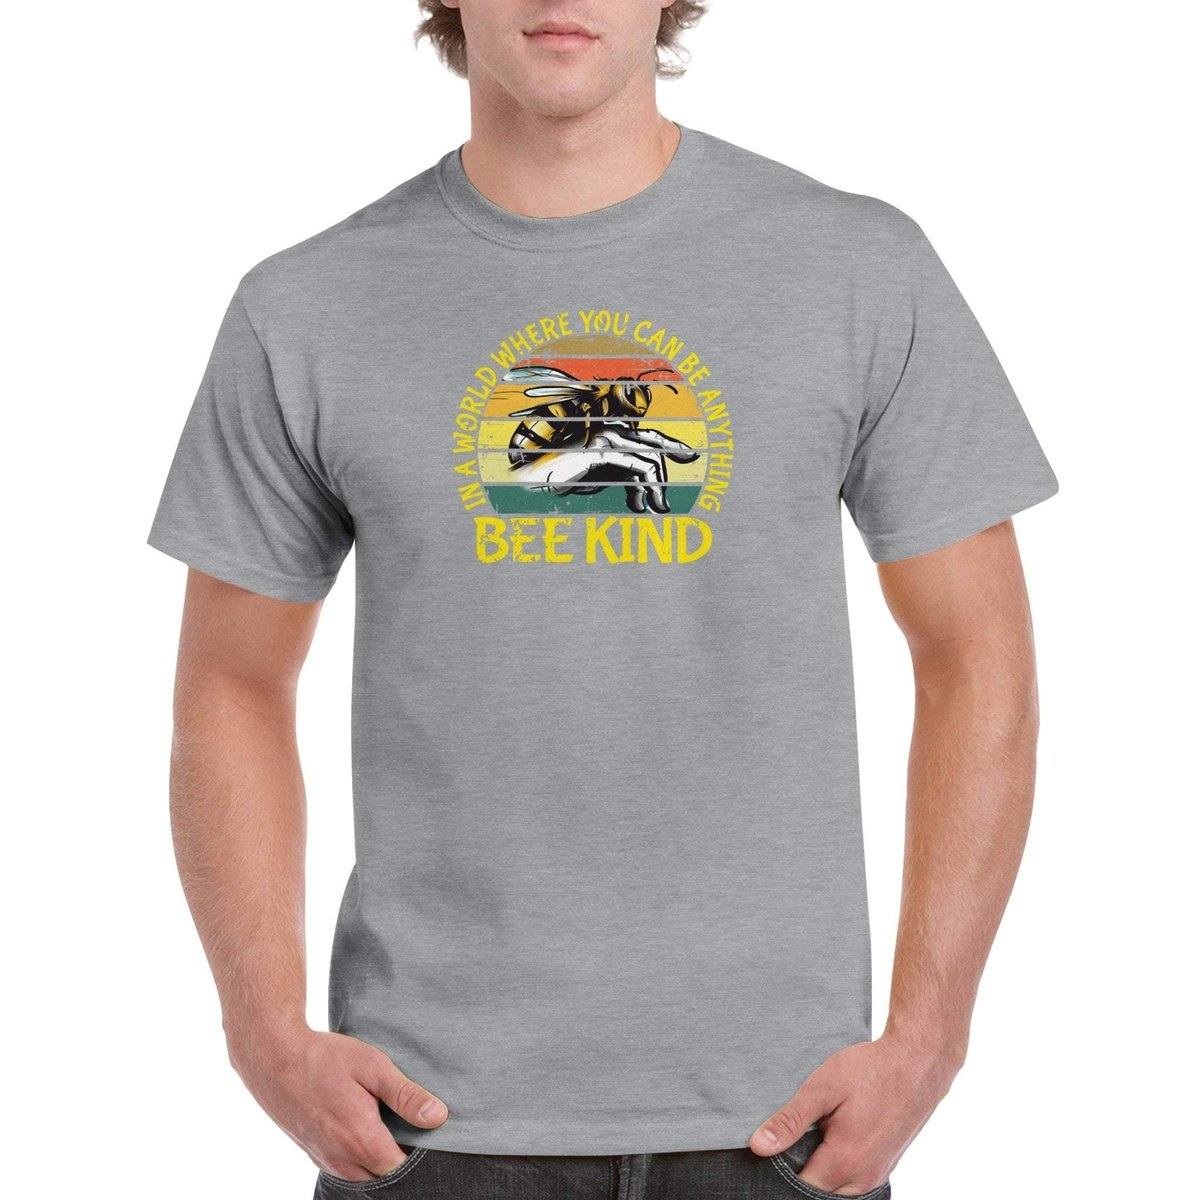 In a world where you can be anything bee kind Tshirt - Retro Vintage Bee - Unisex Crewneck T-shirt Australia Online Color Sports Grey / S